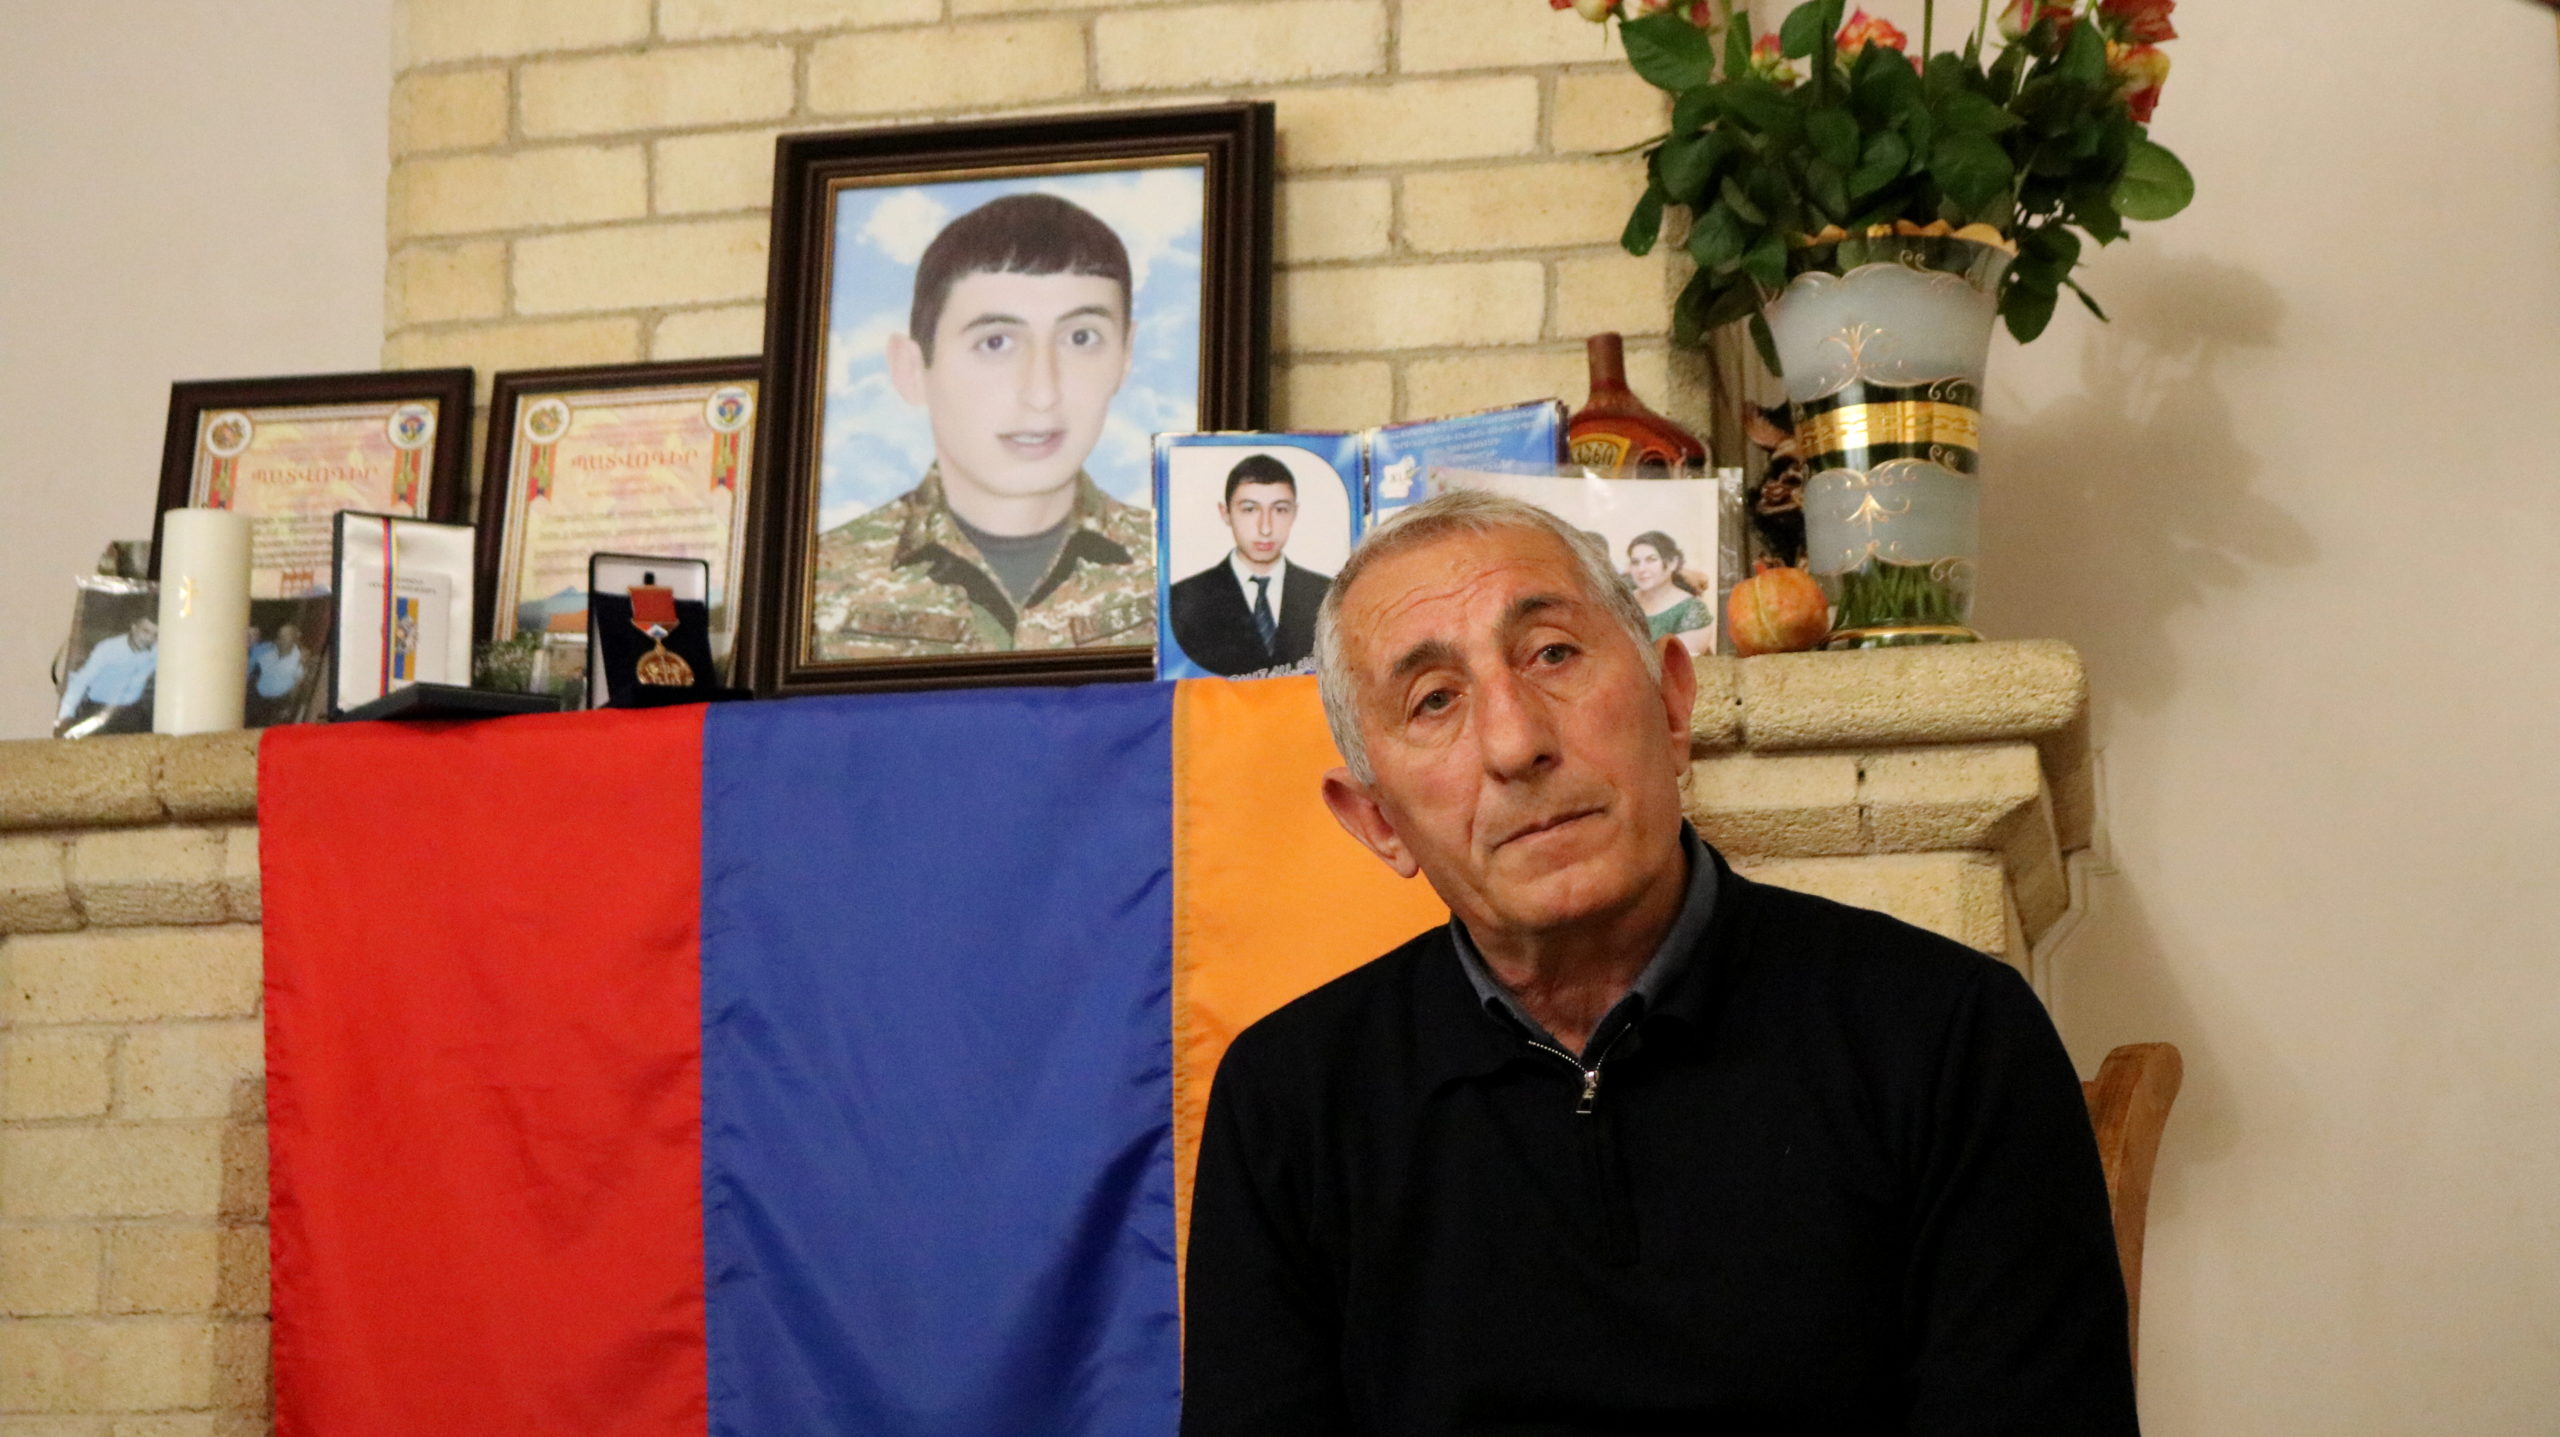 “There was no one in this country who would say, ‘These children died for the sake of the homeland:’ The victims of the Hin Tagher